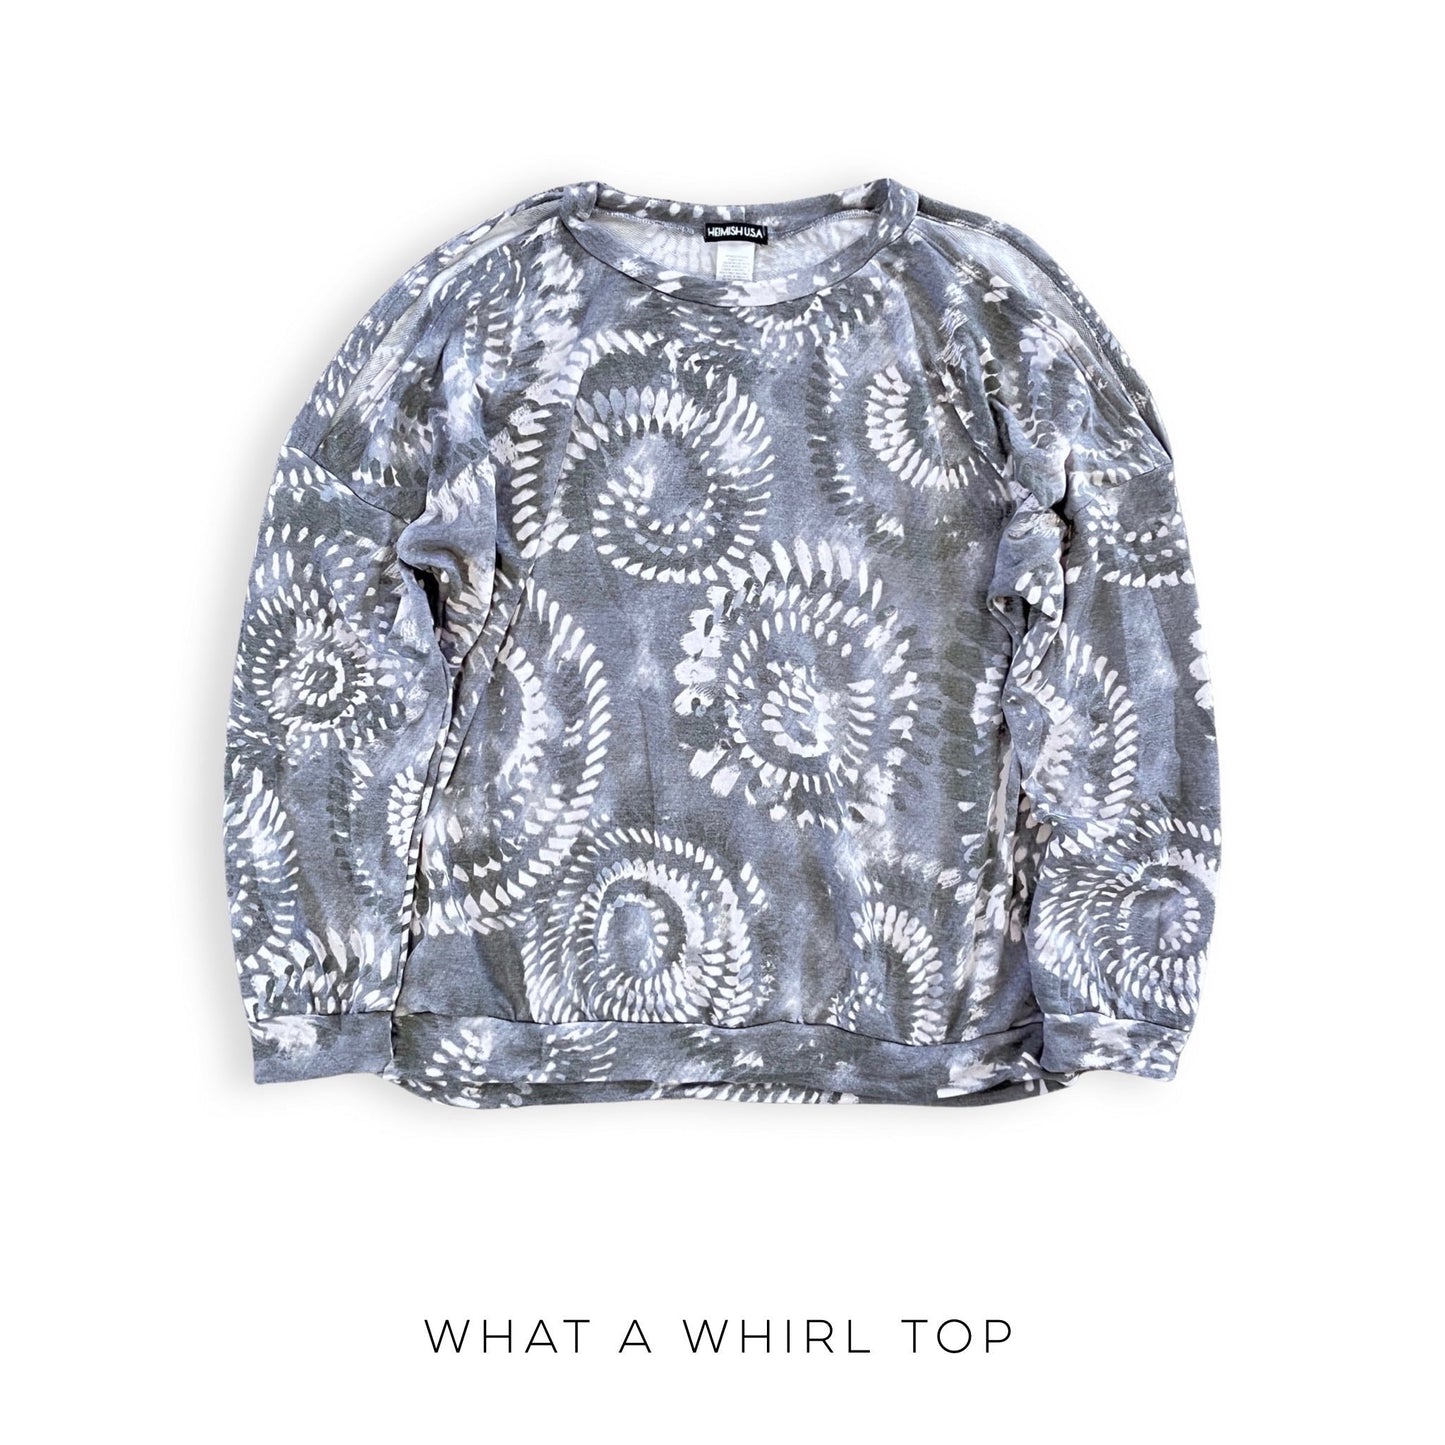 What a Whirl Top